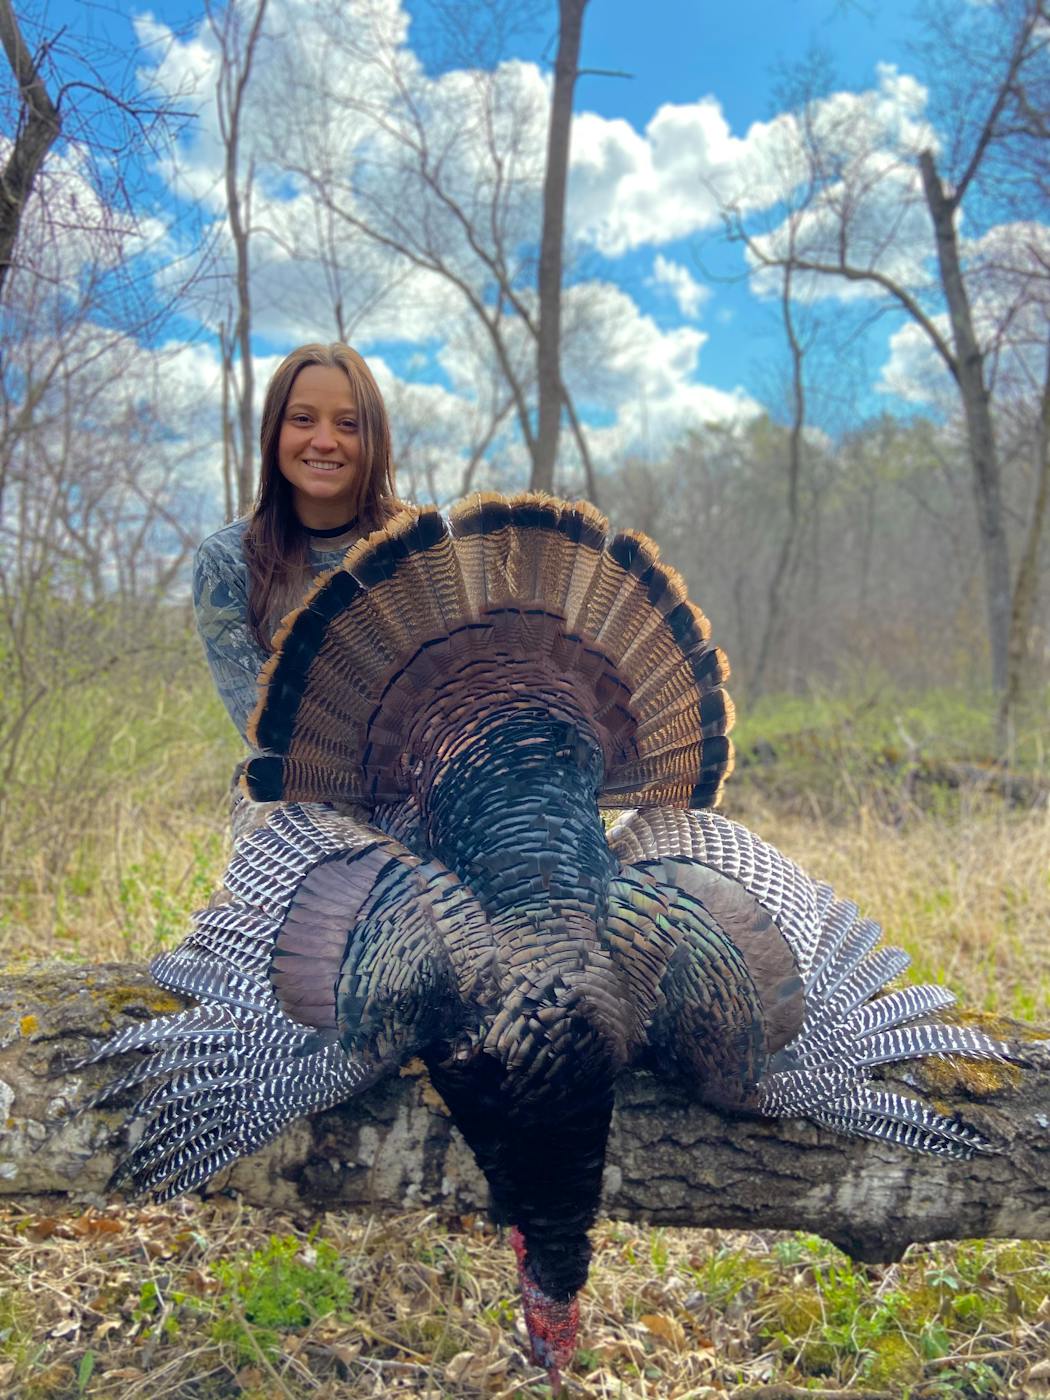 Sophie Arhart grew up in Minnesota, but has hunted throughout the state, including in the southeast, where she shot this big tom.